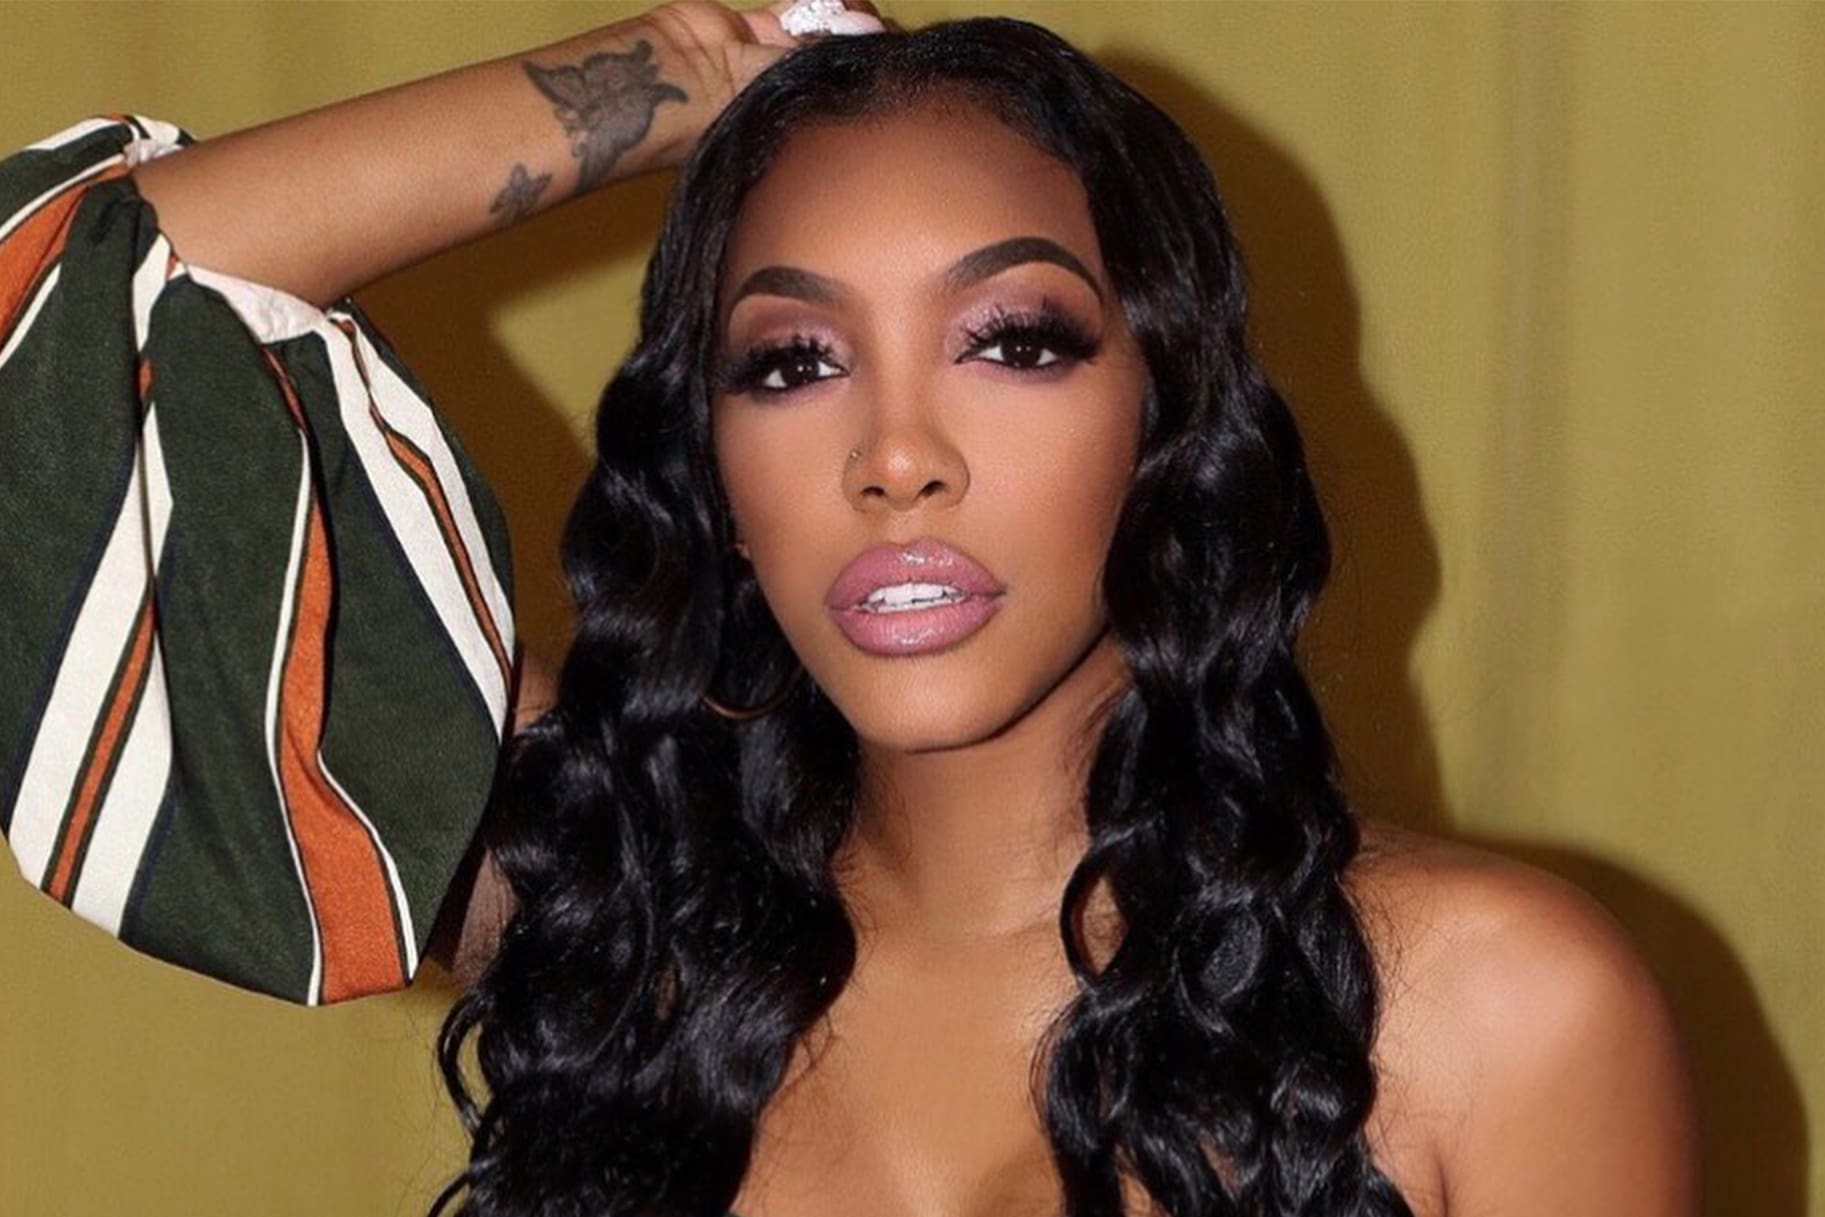 Porsha Williams' Fans Are Hoping That Justice Will Be Served In Breonna Taylor's Case